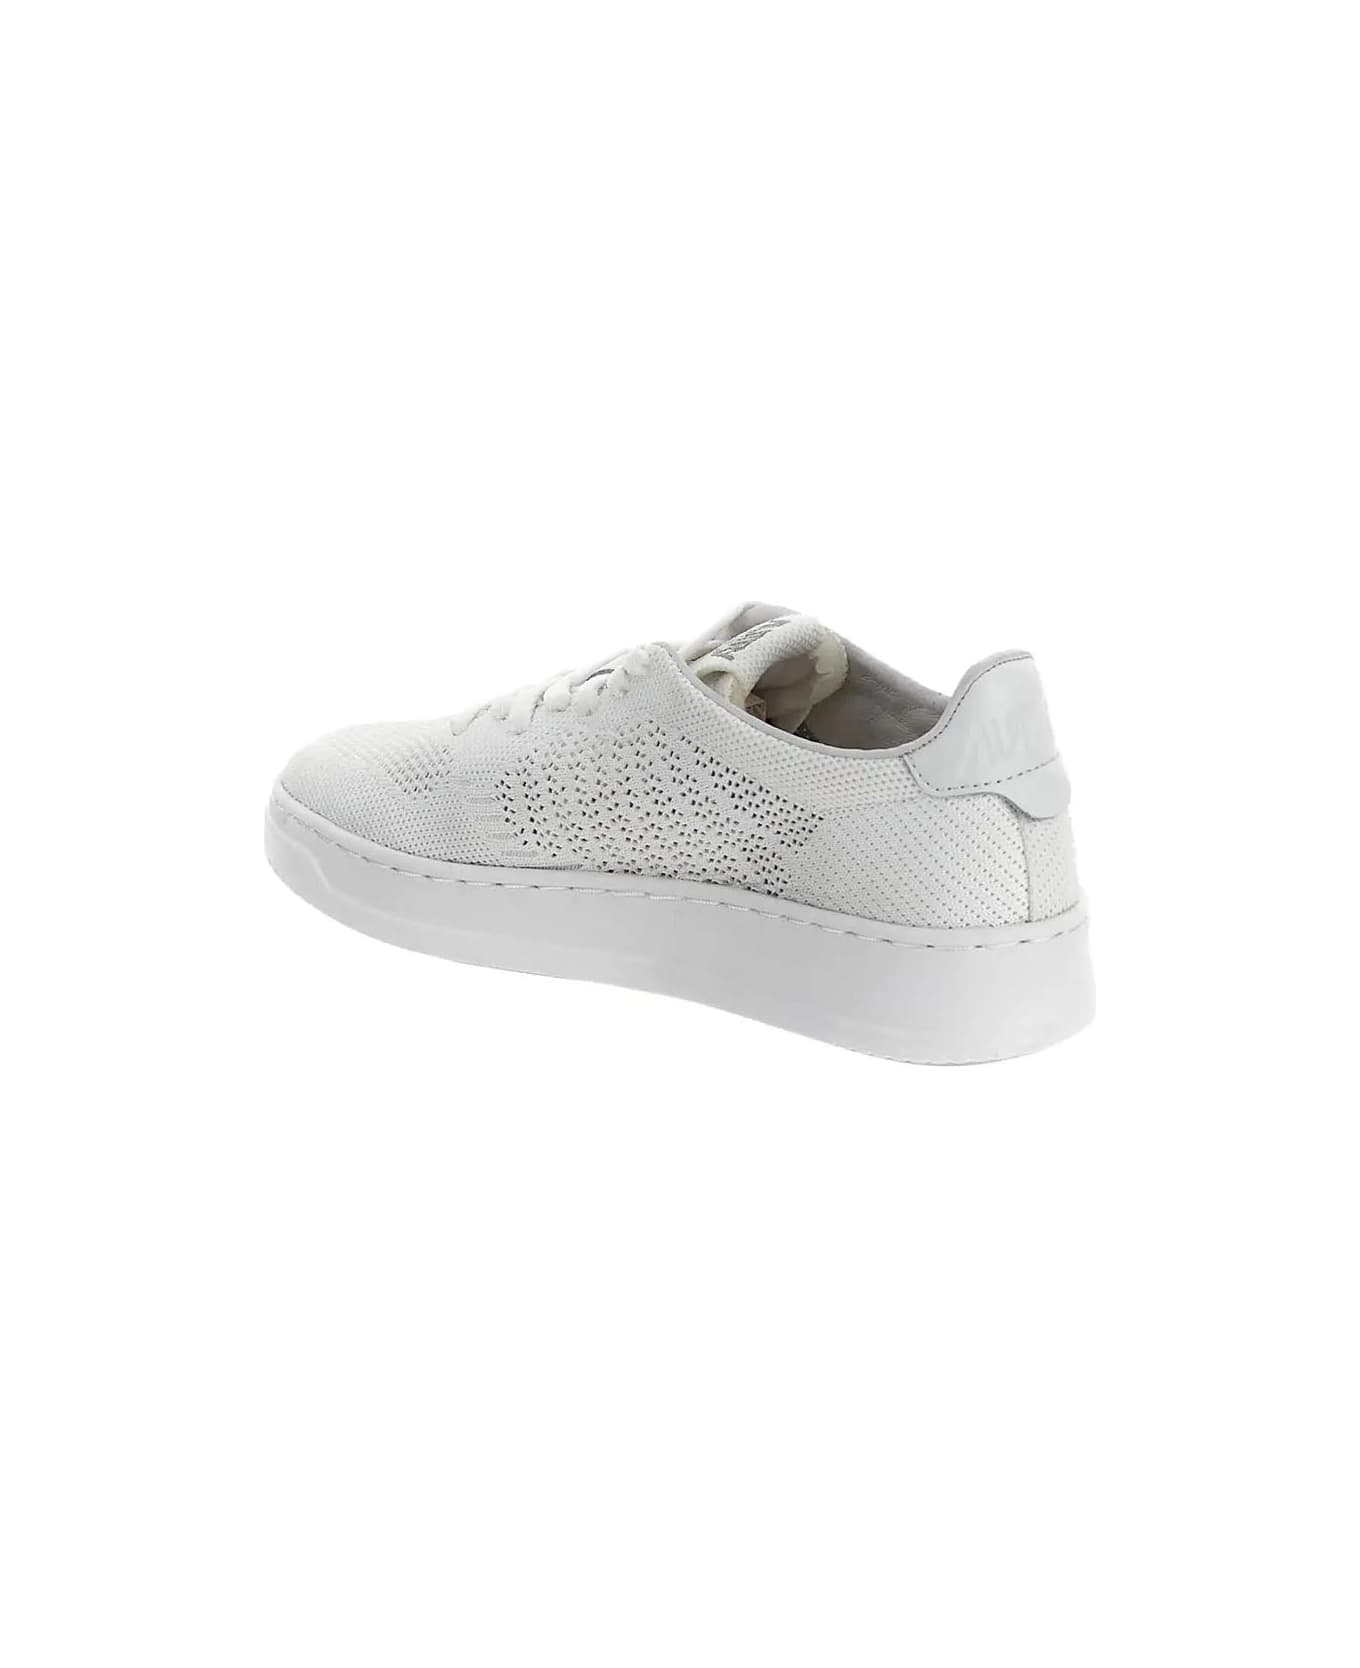 Autry White Easeknit Low Sneakers - White スニーカー